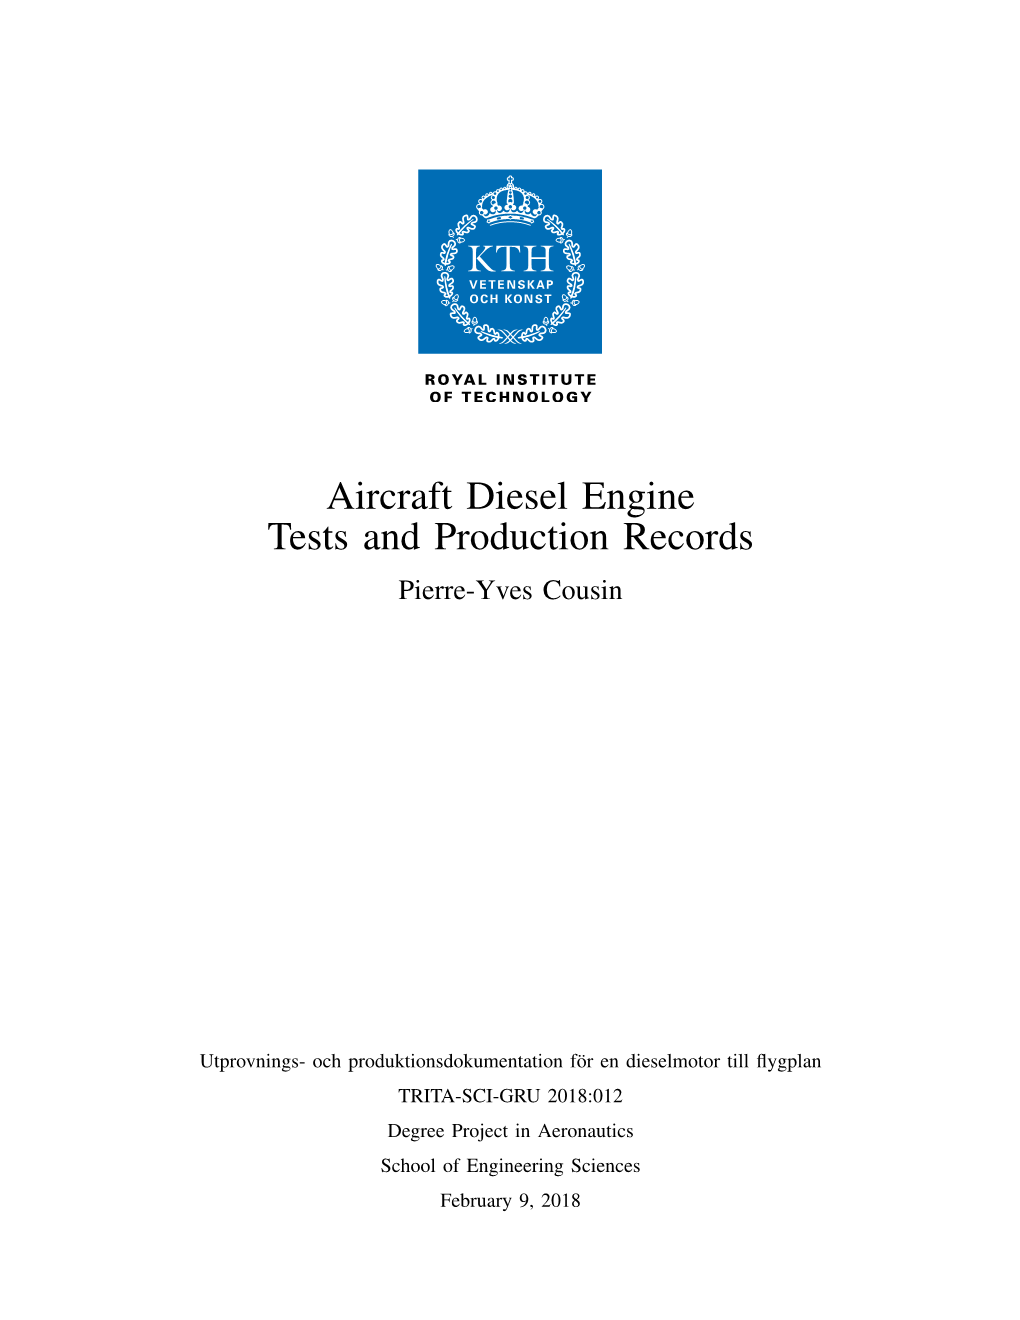 Aircraft Diesel Engine Tests and Production Records Pierre-Yves Cousin